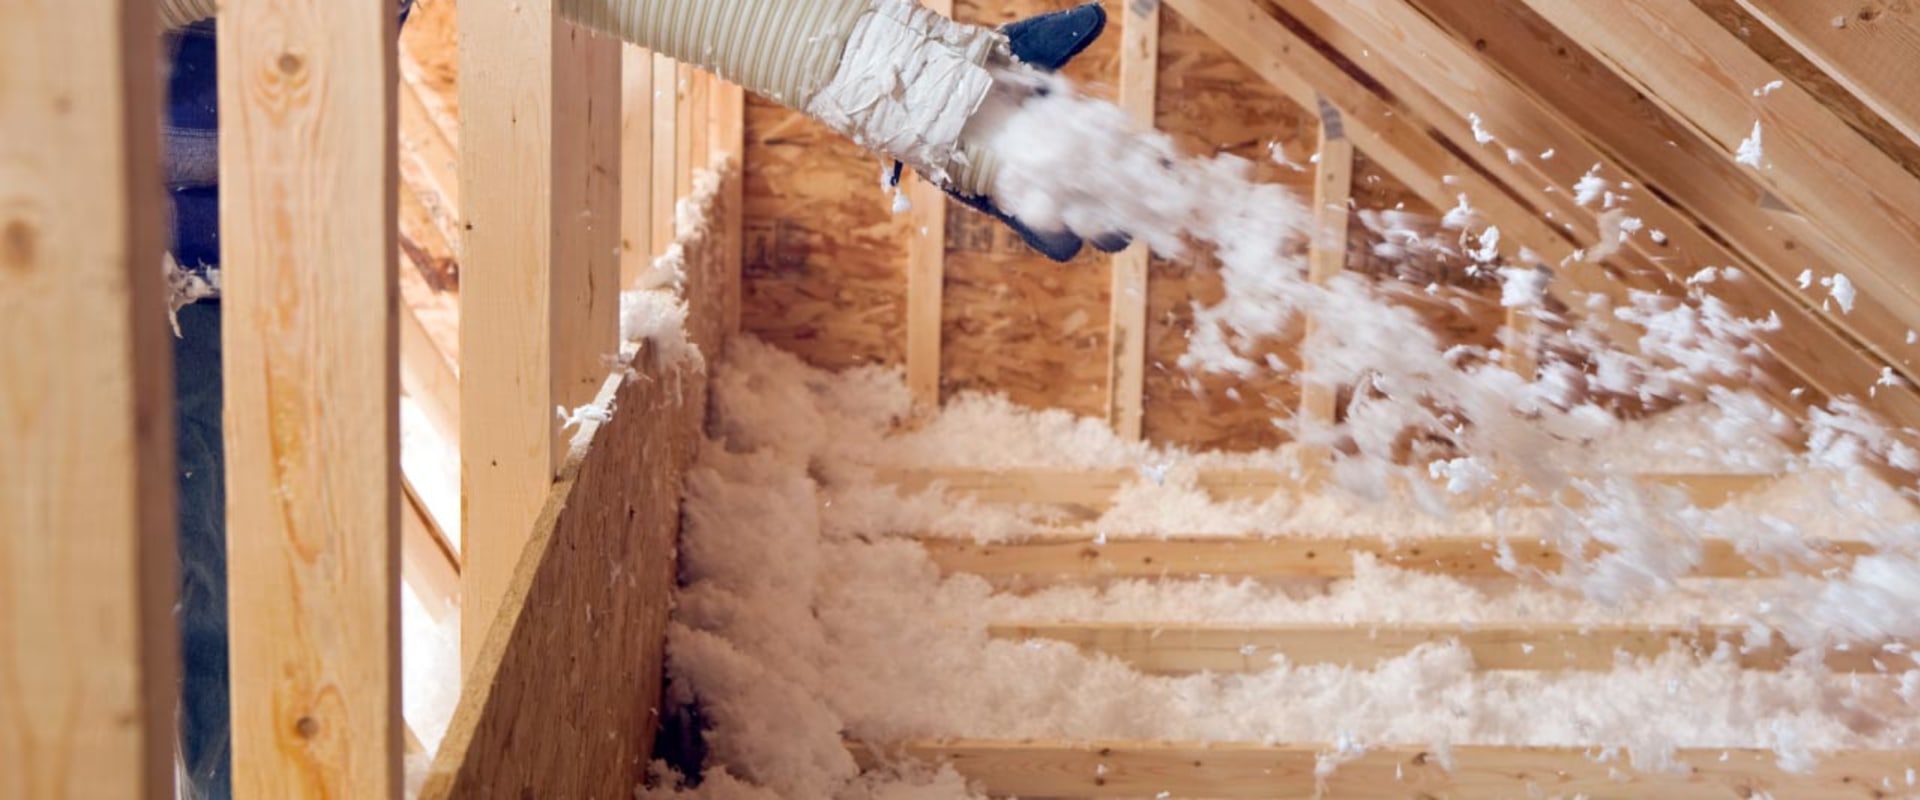 Attic Insulation Installation in West Palm Beach, FL: What You Need to Know